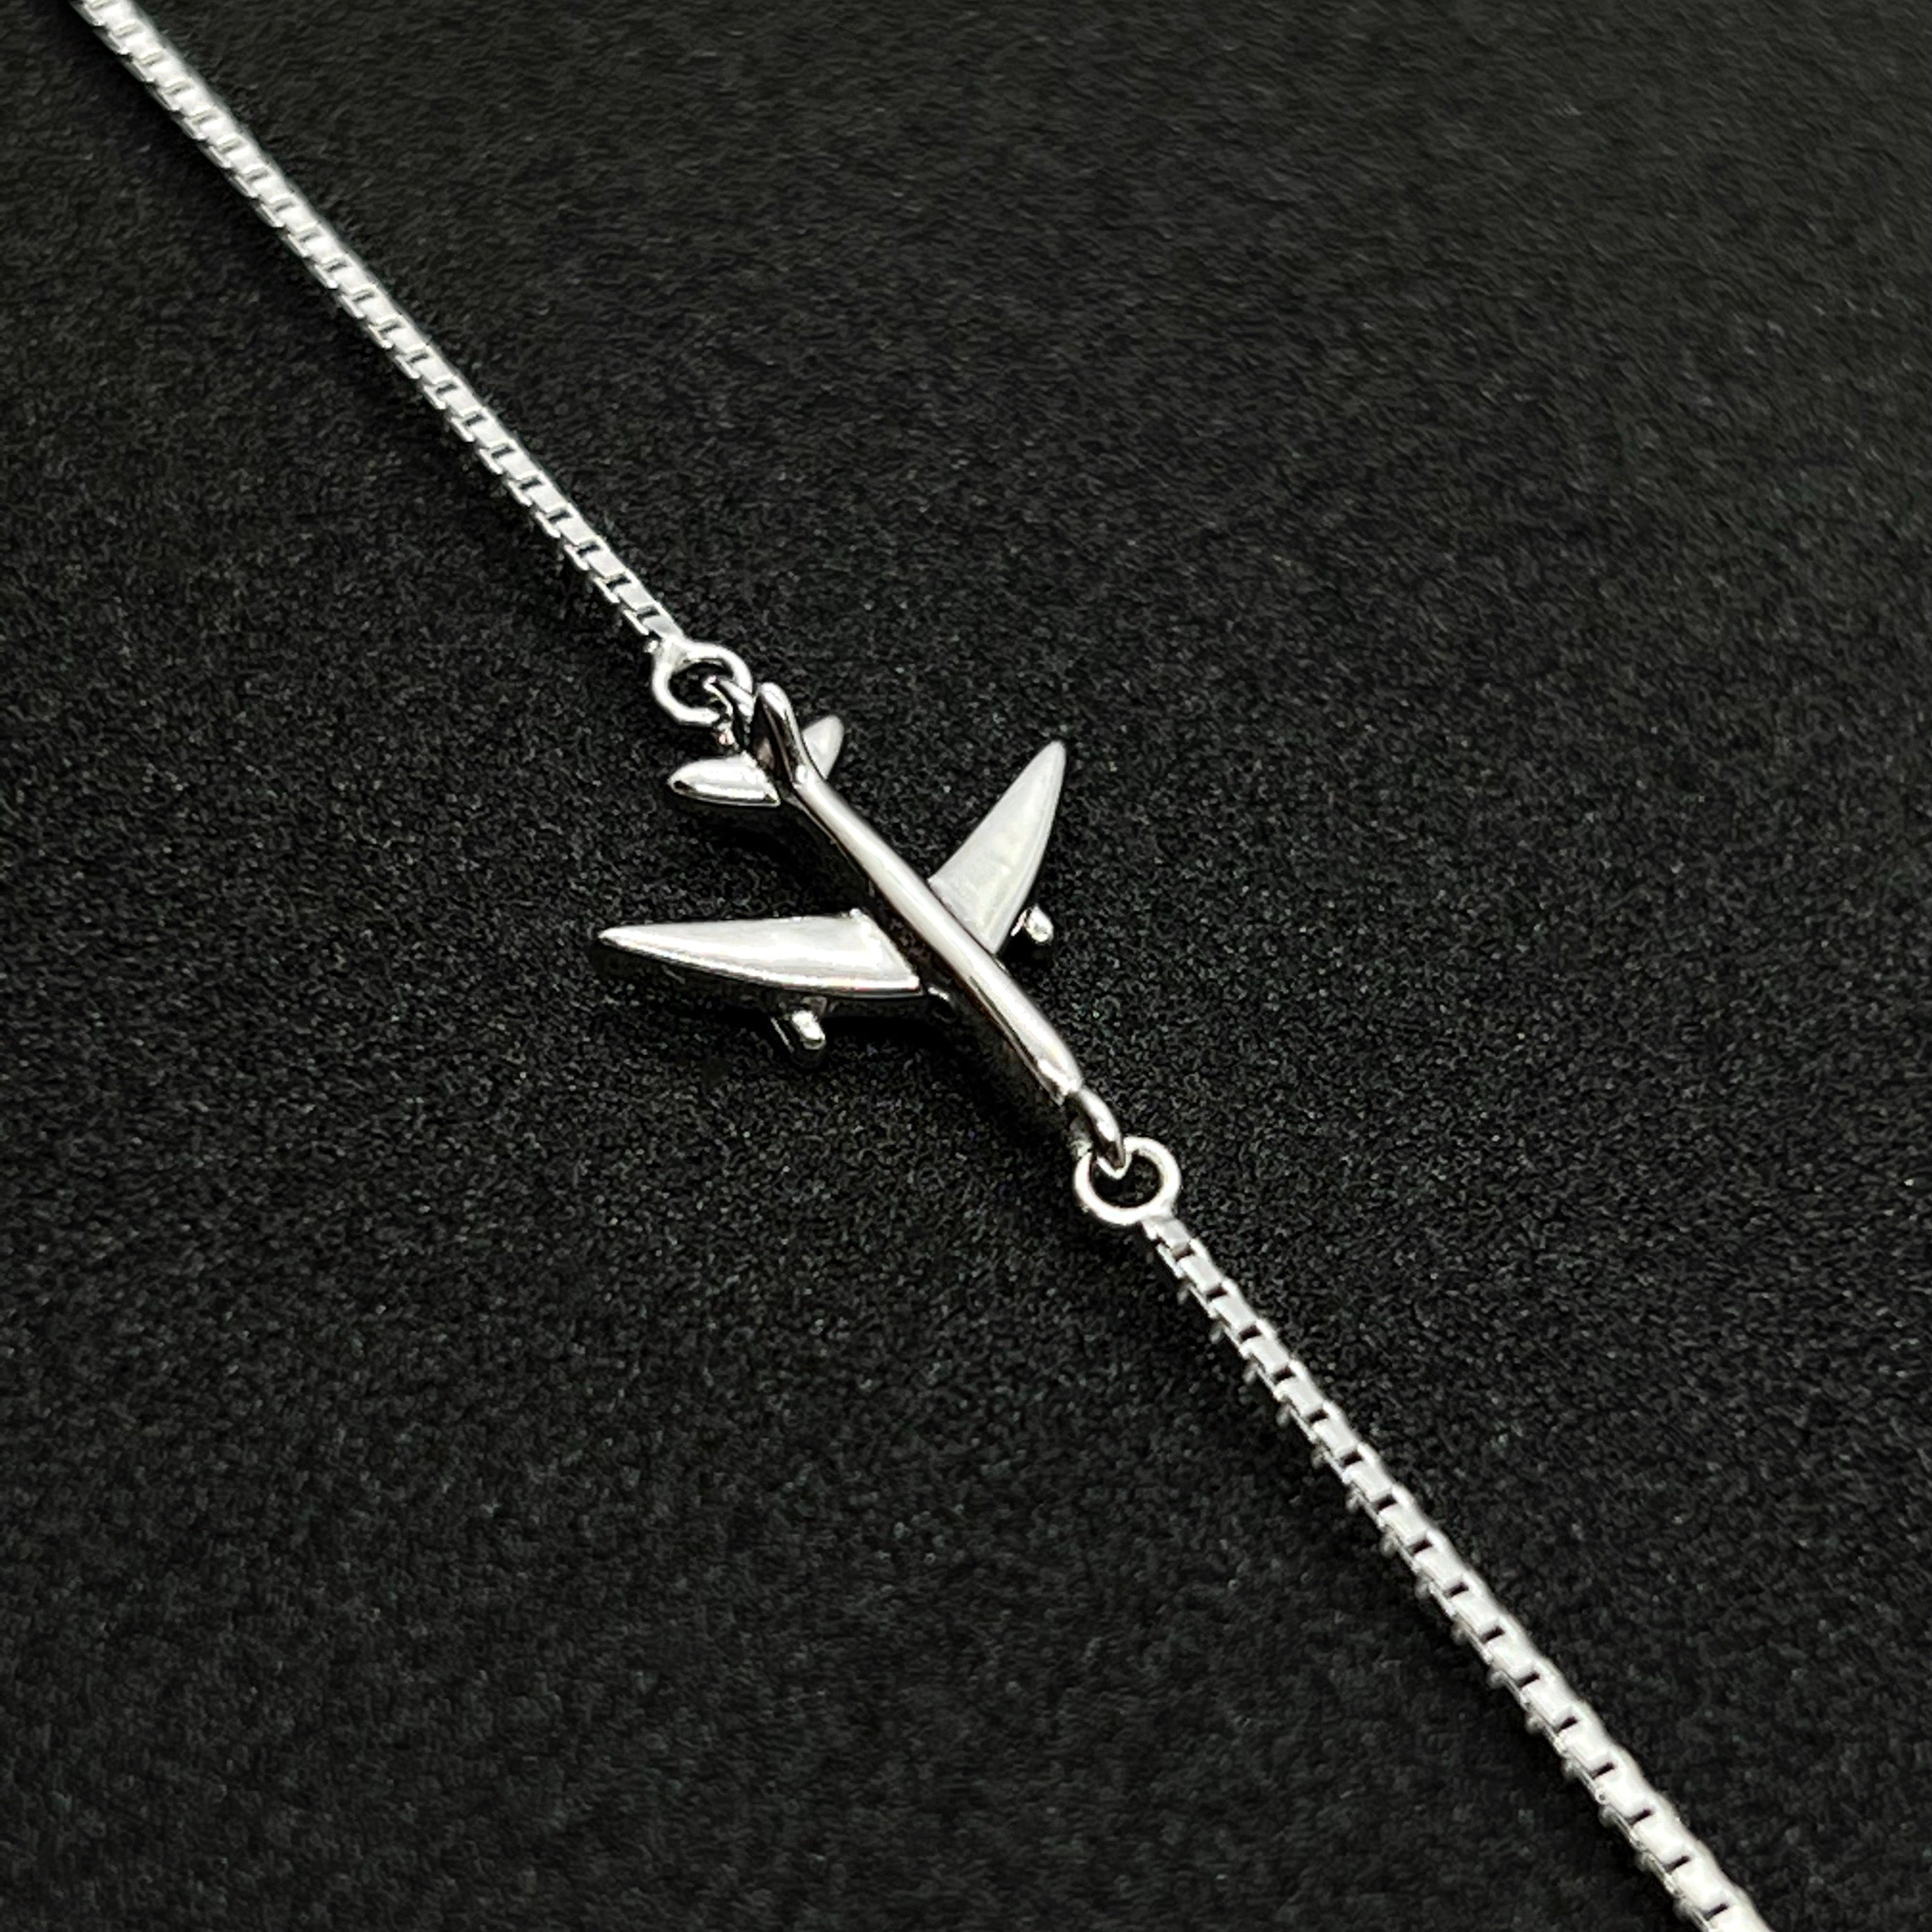 Airplane necklace.  Aviation jewelry, Airplane necklace, Necklace